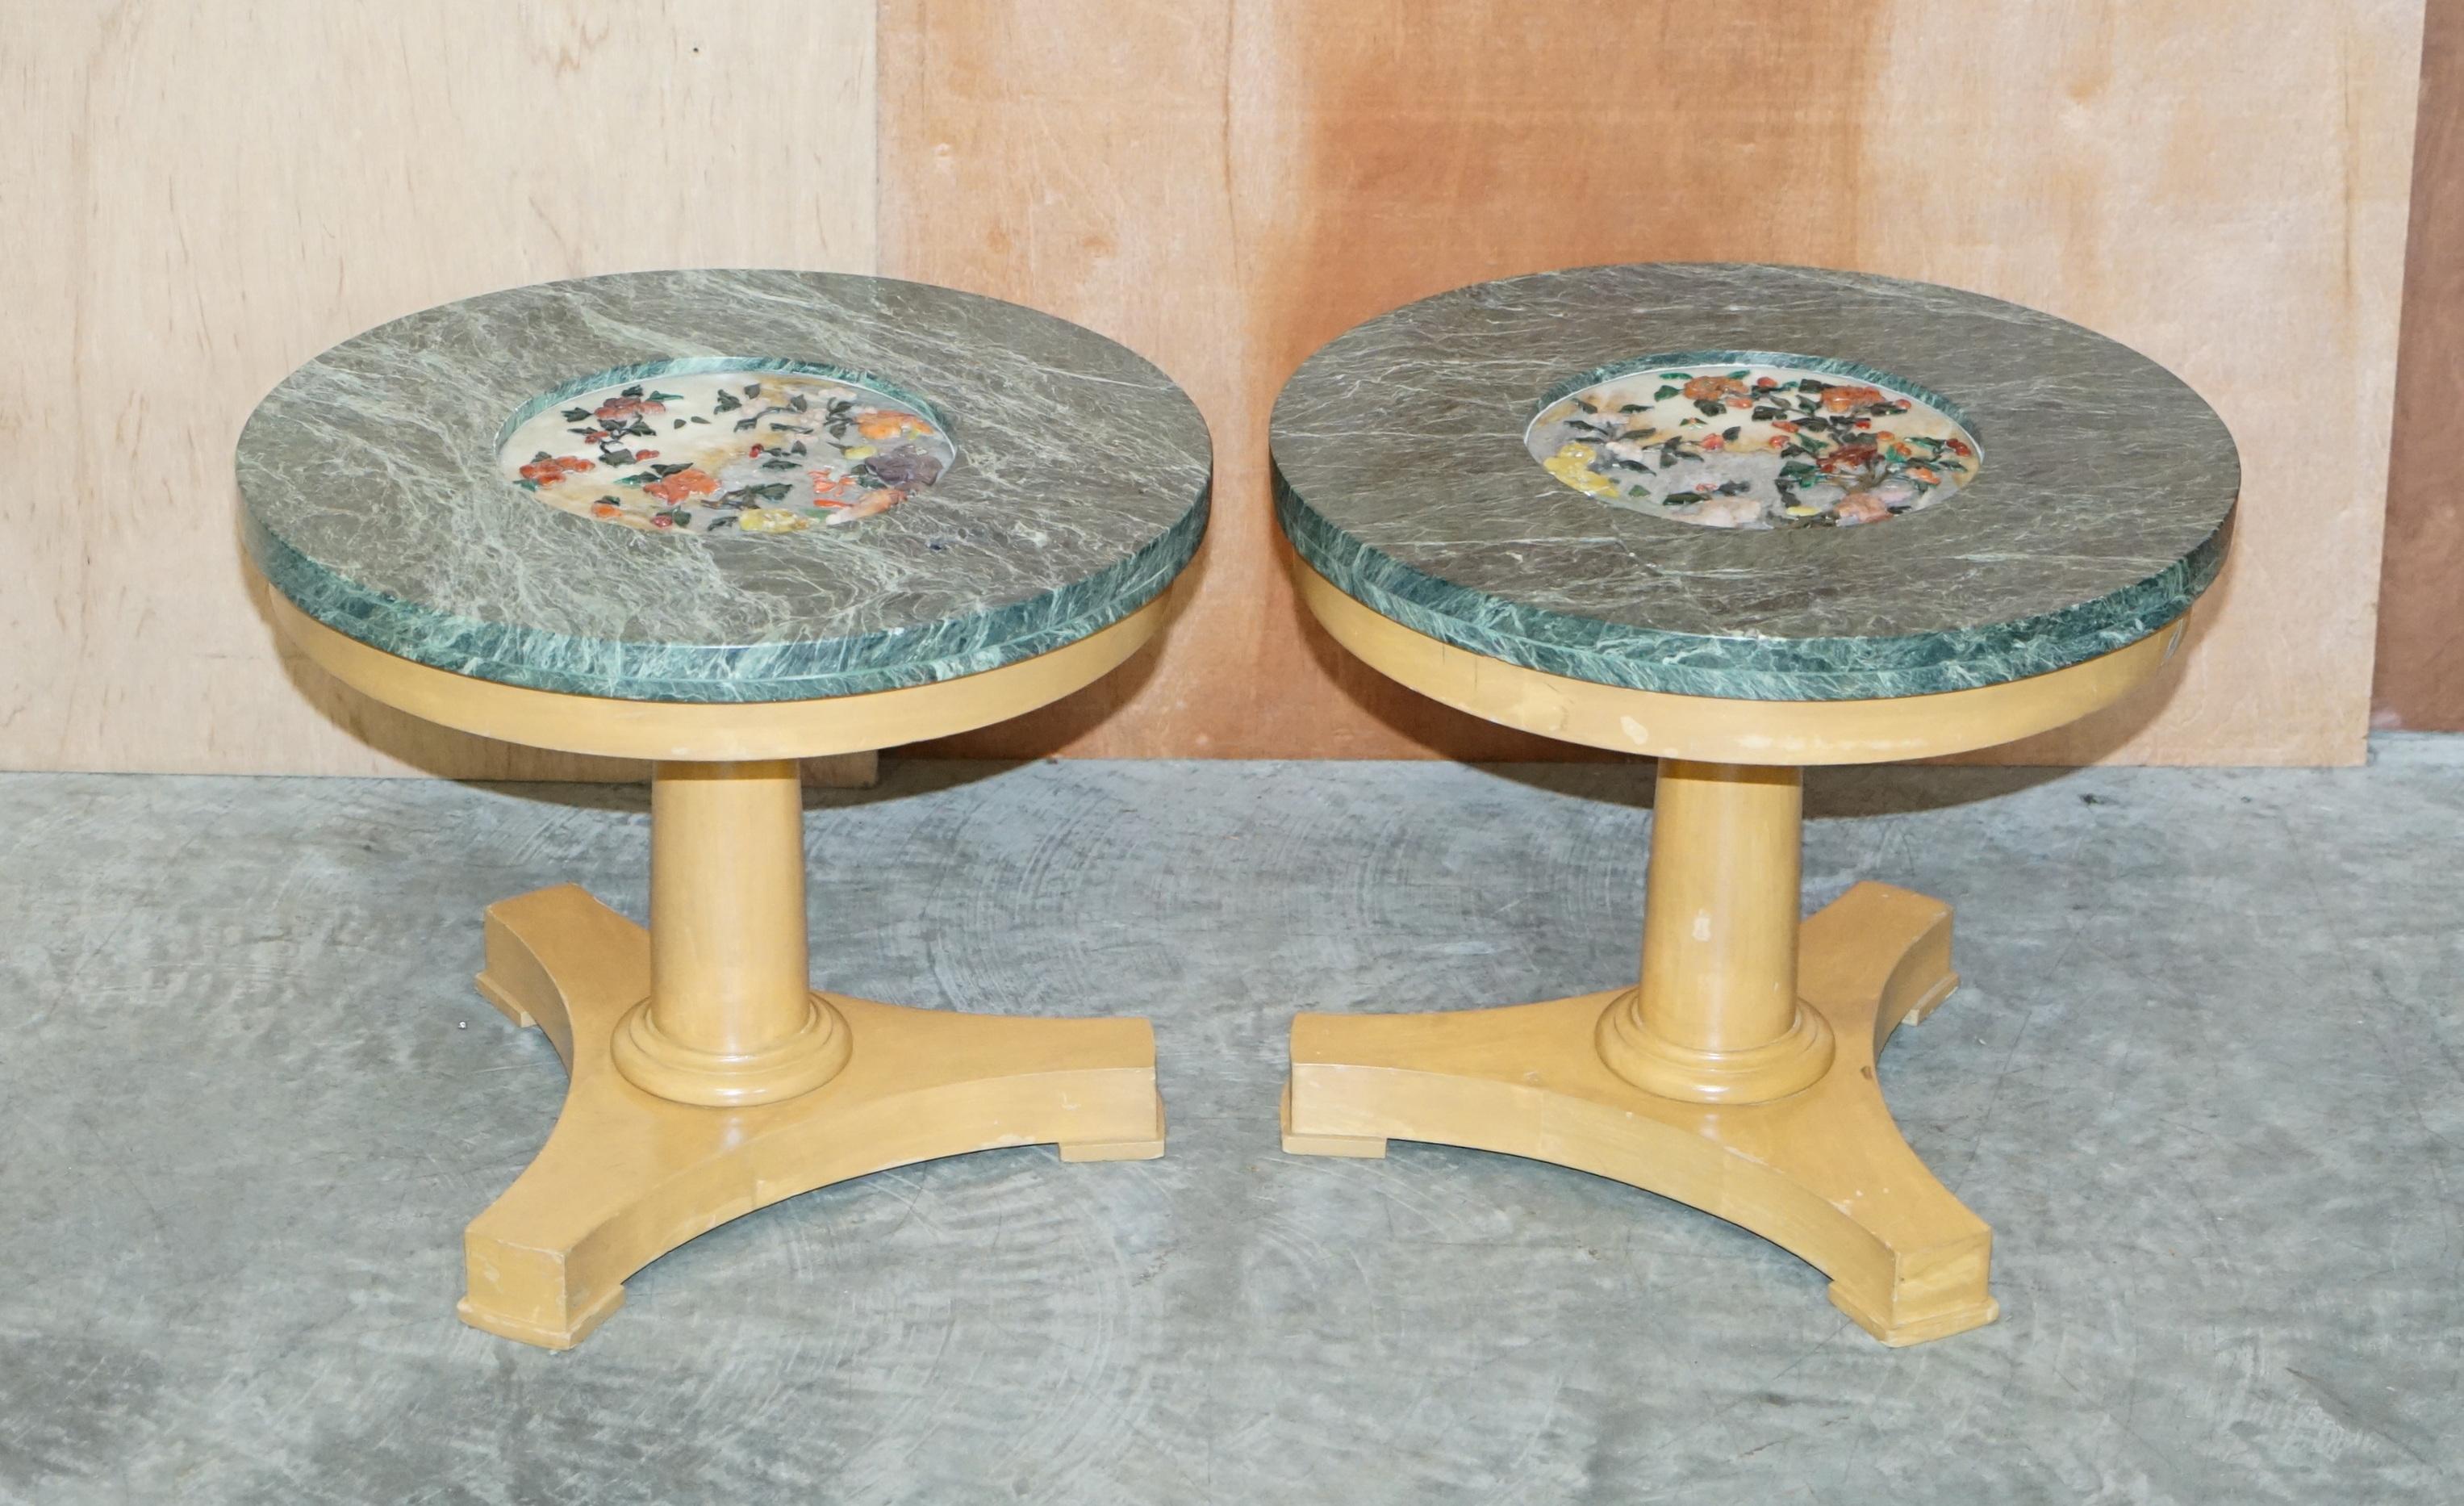 We are delighted to offer this lovely pair of very decorative blonde walnut side tables with marble tops inset with flowers

A good looking and well made pair, they make great side tables as they have a wide surface and being marble, it won’t